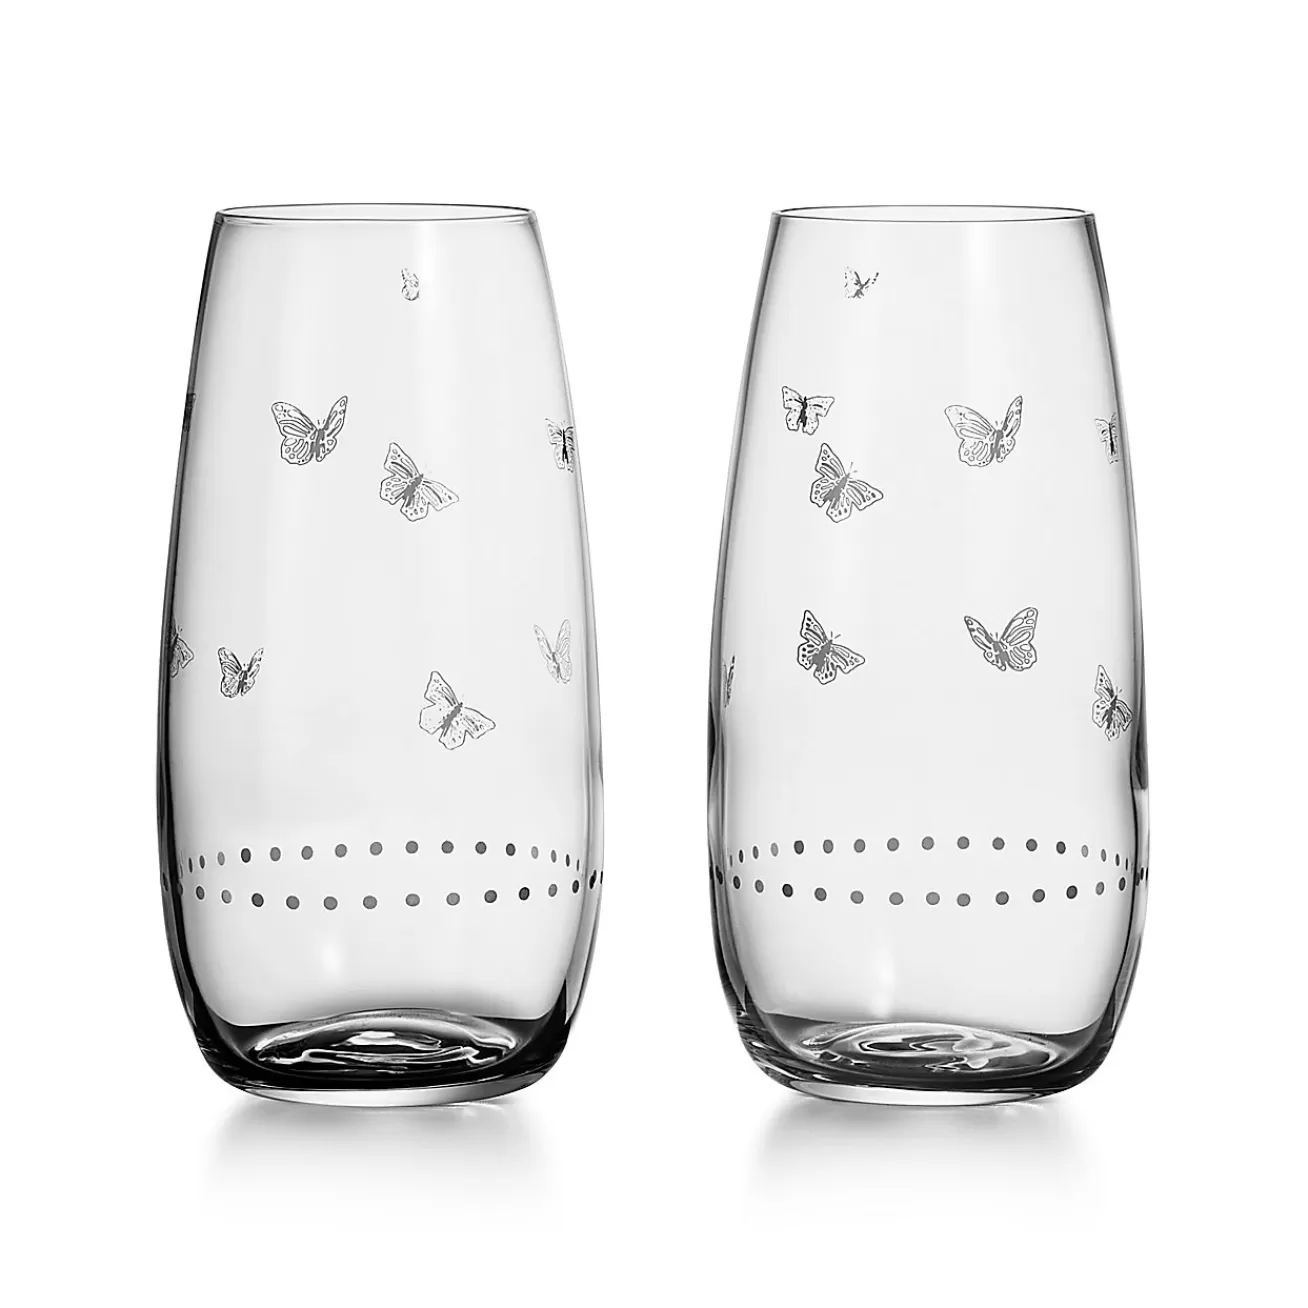 Tiffany & Co. Tiffany Jardin Stemless Coupe Glasses in Etched Glass, Set of Two | ^ The Home | Housewarming Gifts